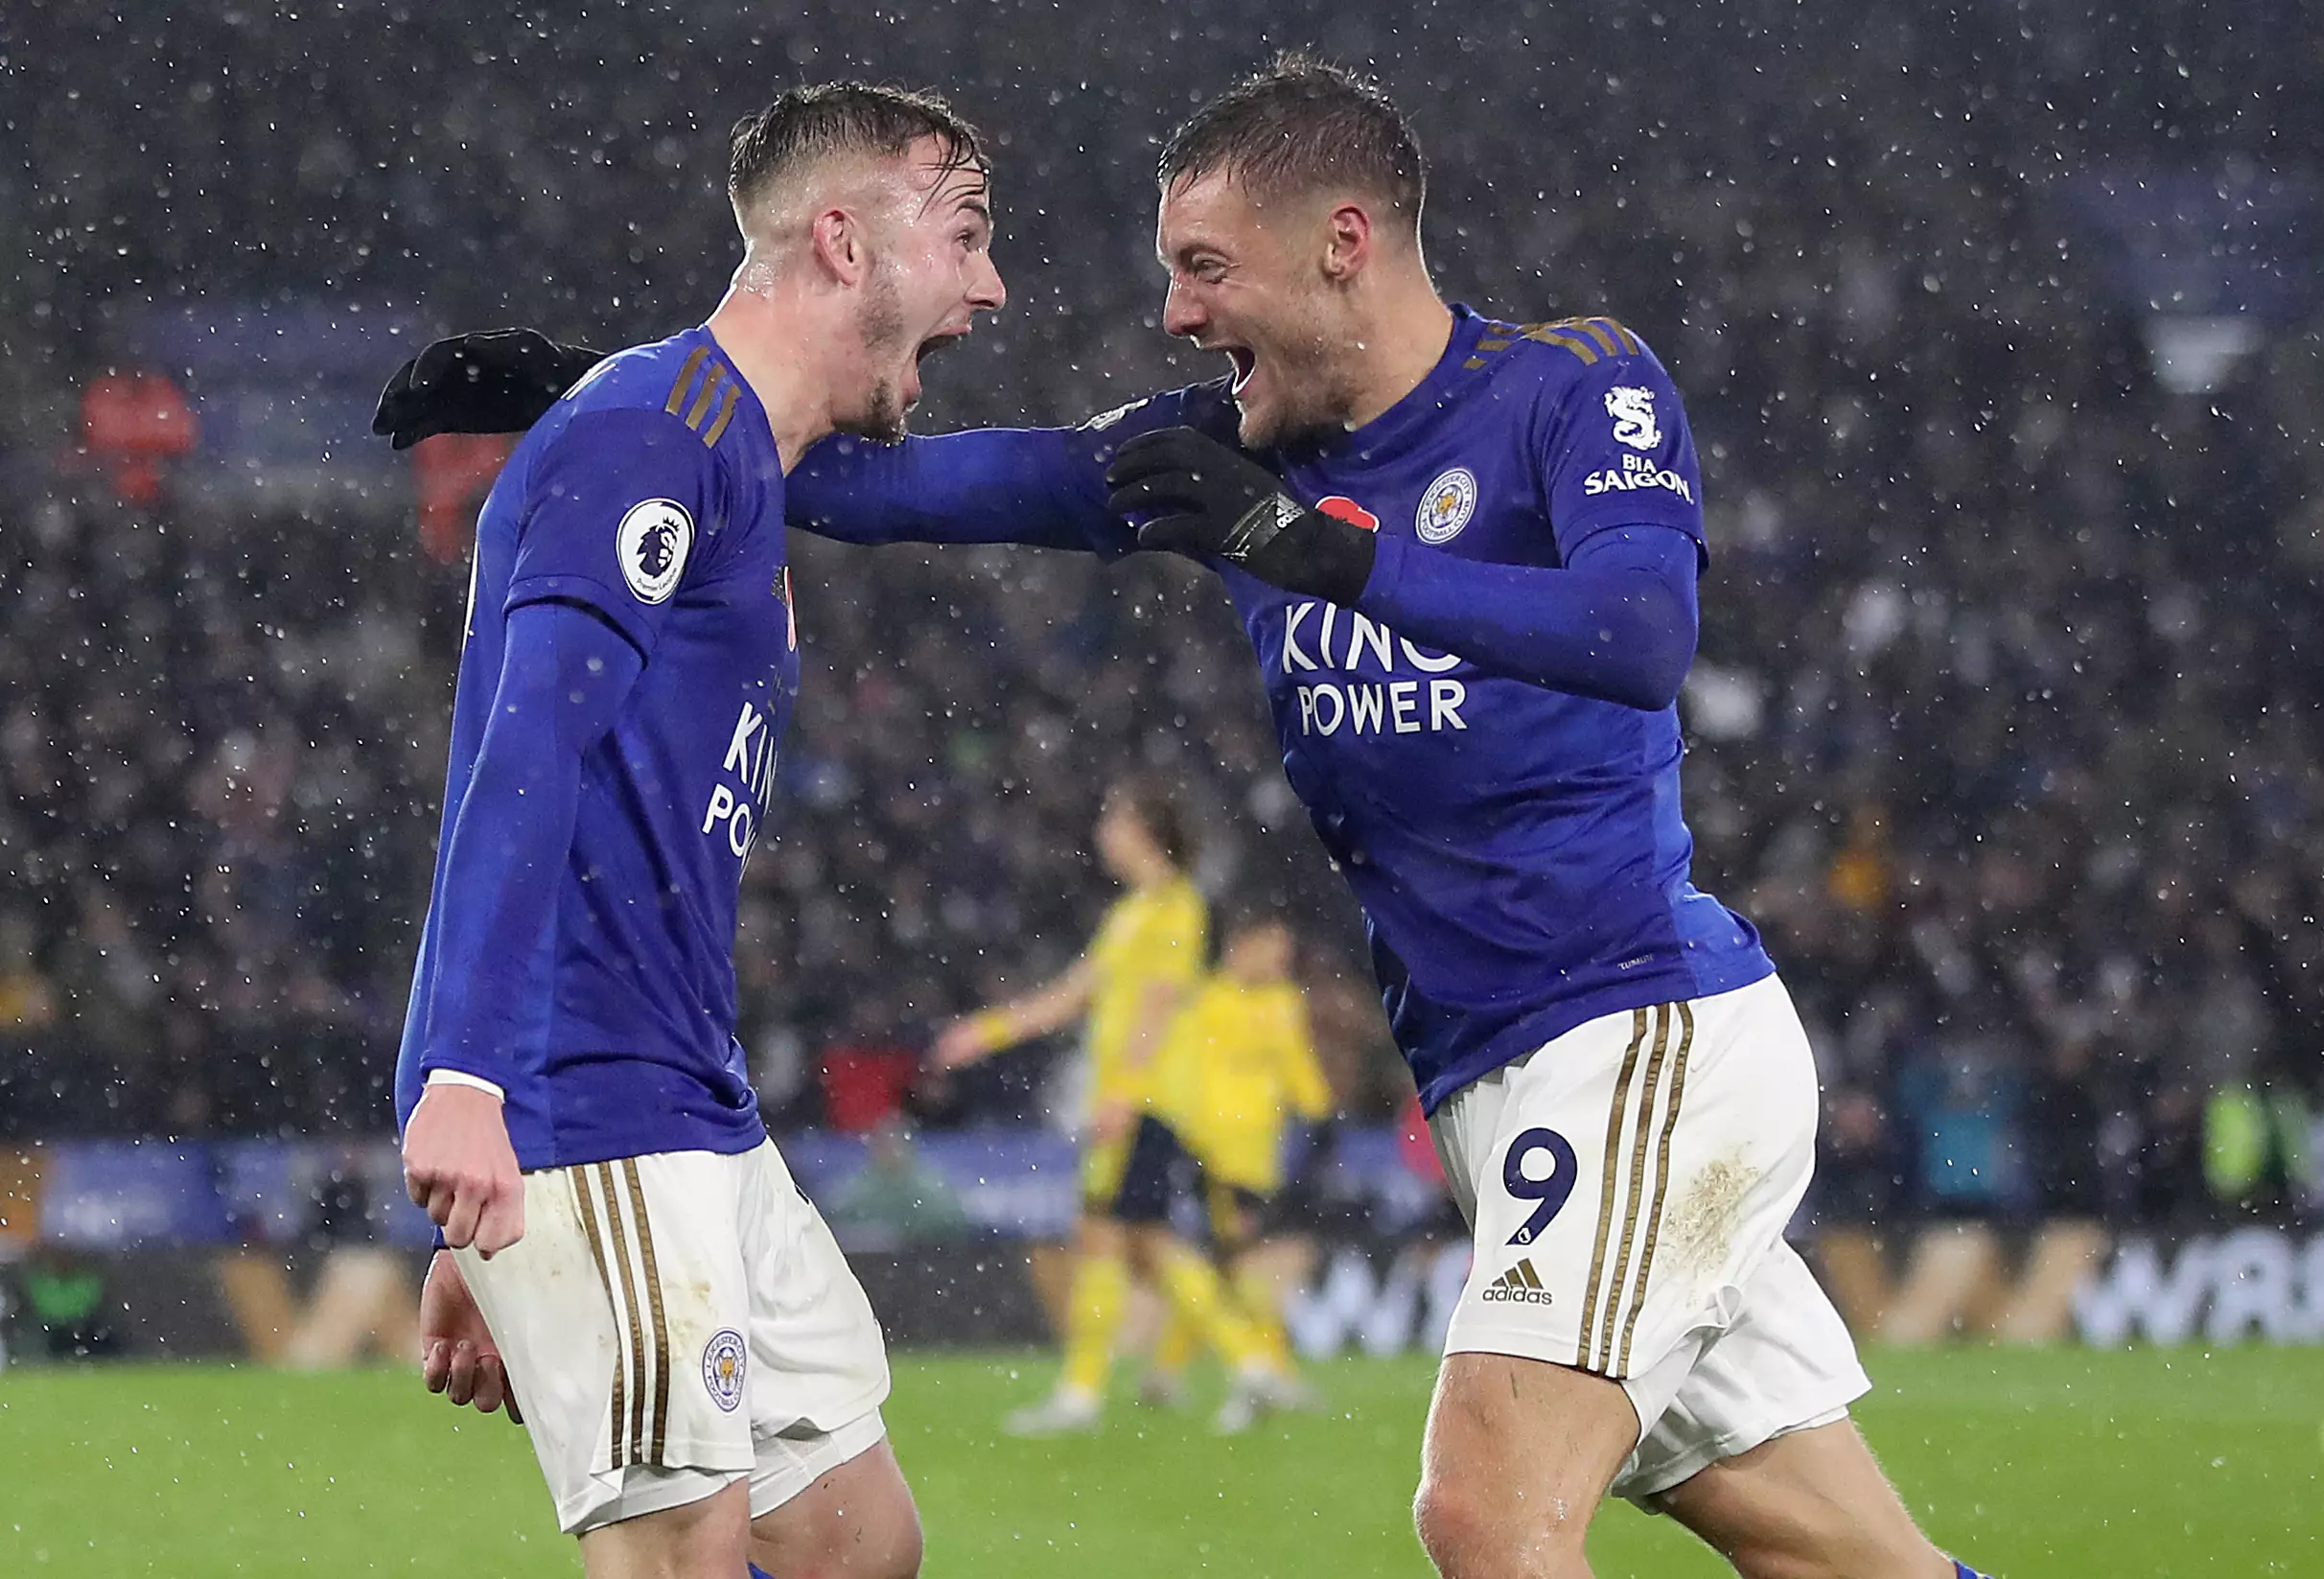 James Maddison scored the second in a routine win for Leicester